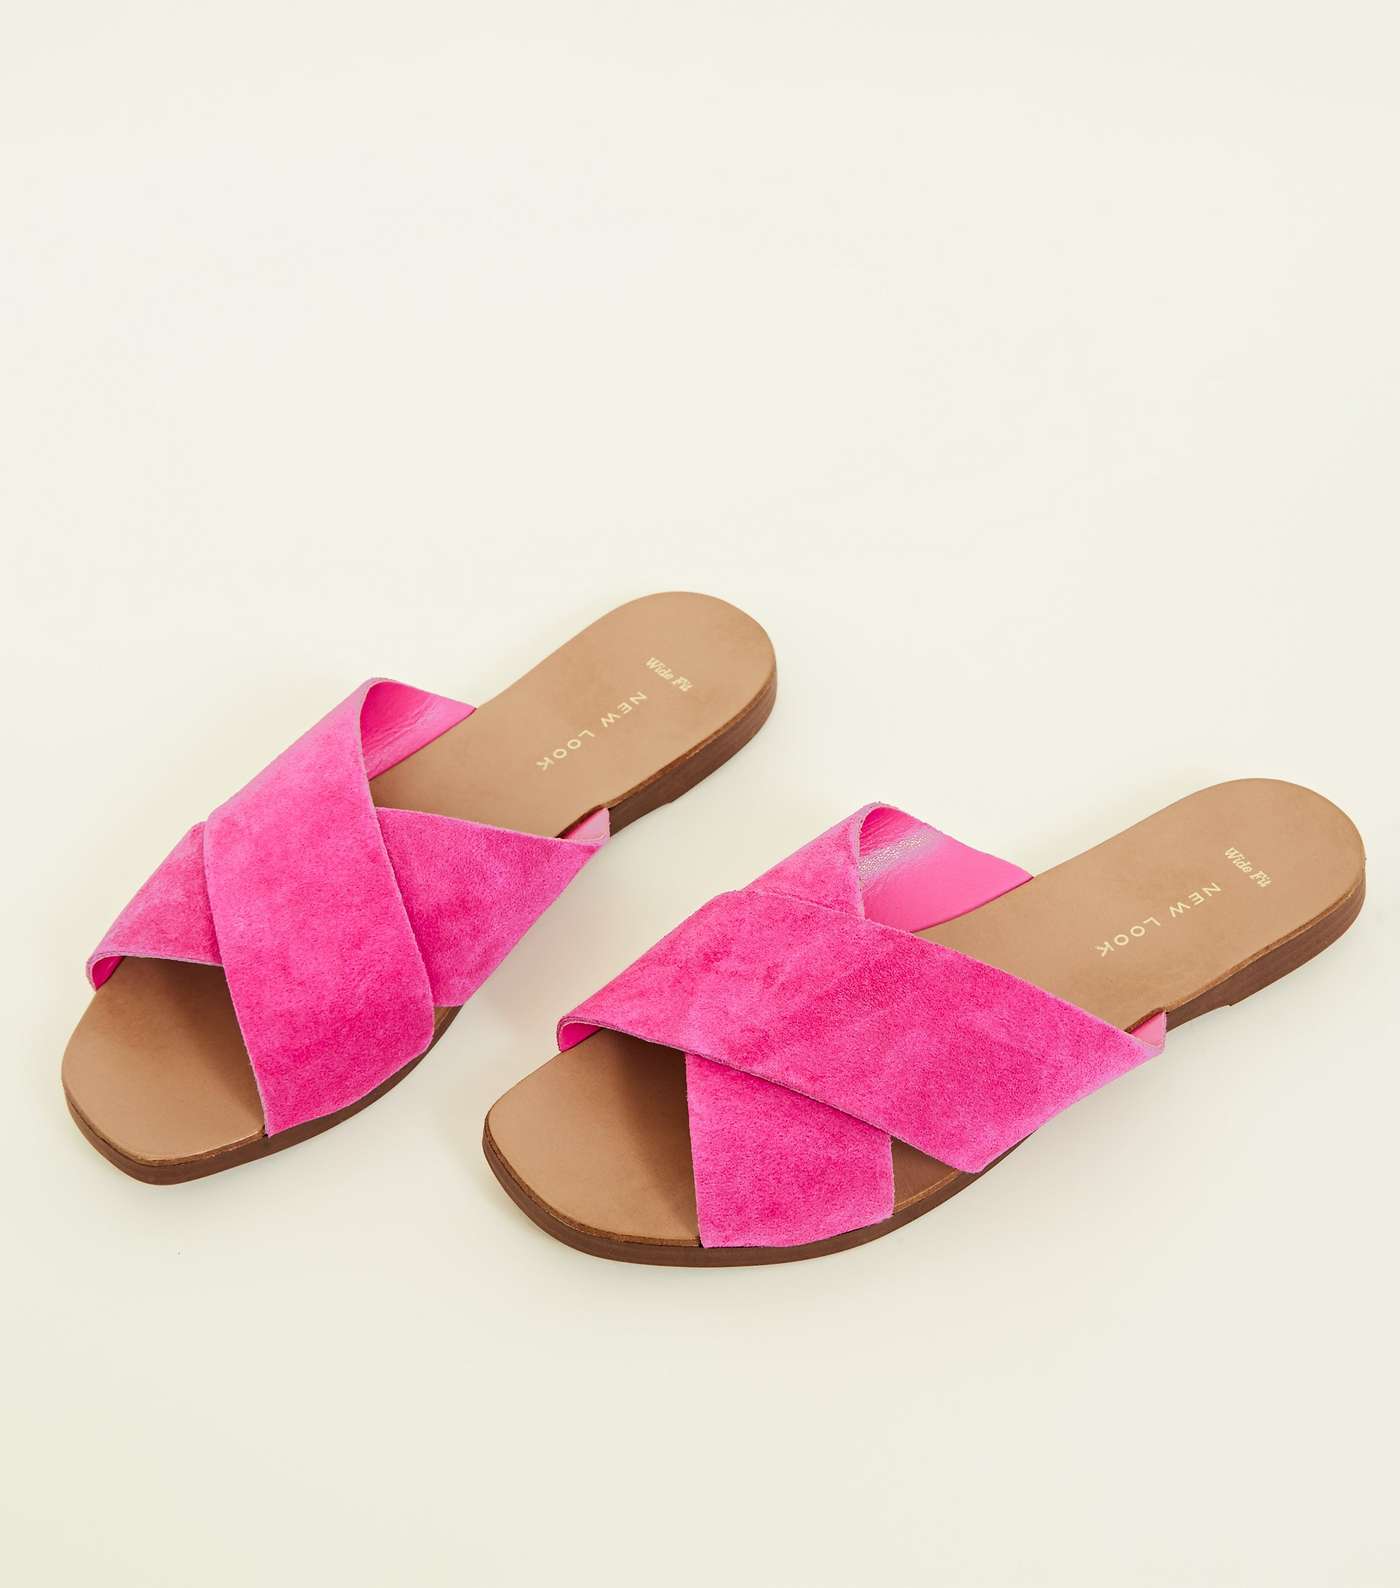 Wide Fit Bright Pink Suede Cross Strap Sliders Image 4